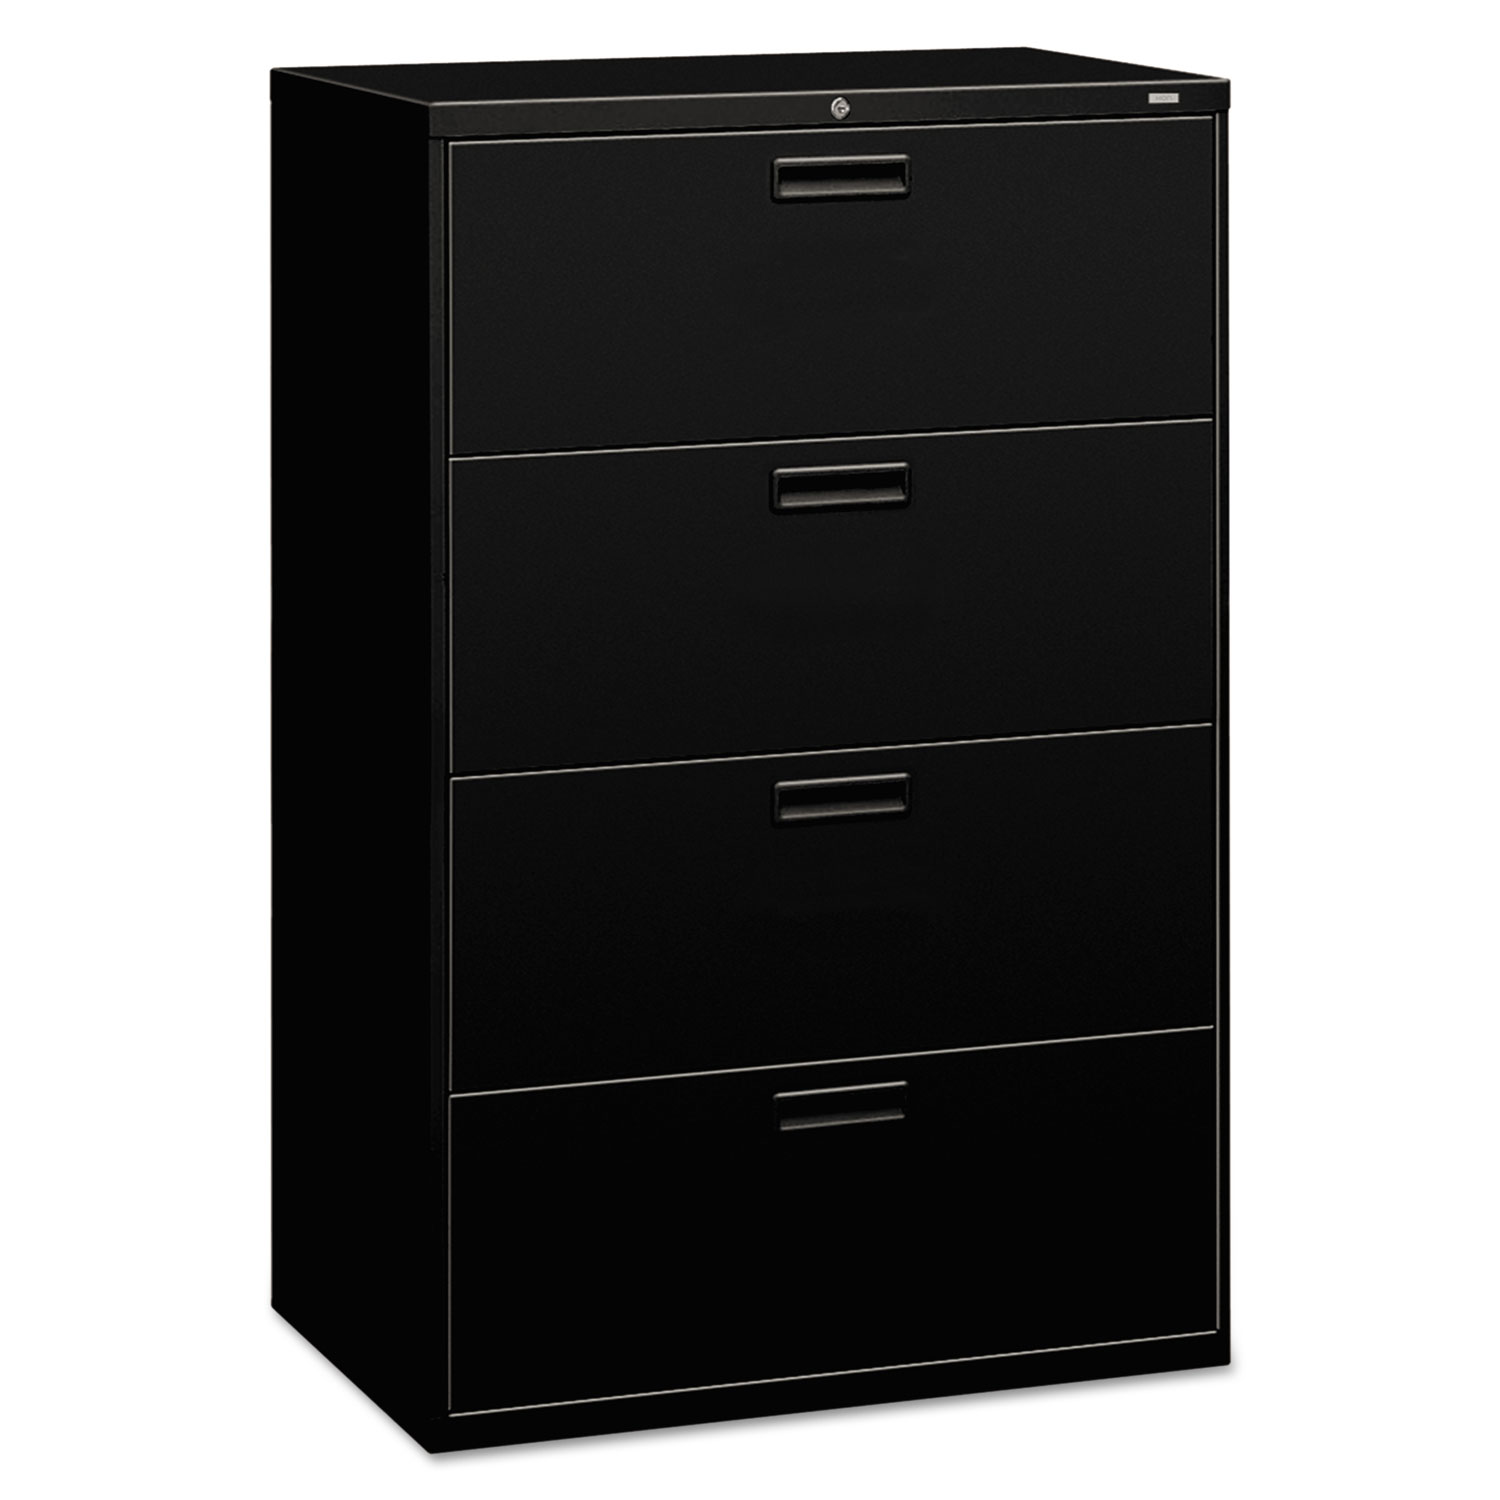 500 Series Four-Drawer Lateral File, 36w x 19-1/4d x 53-1/4h, Black